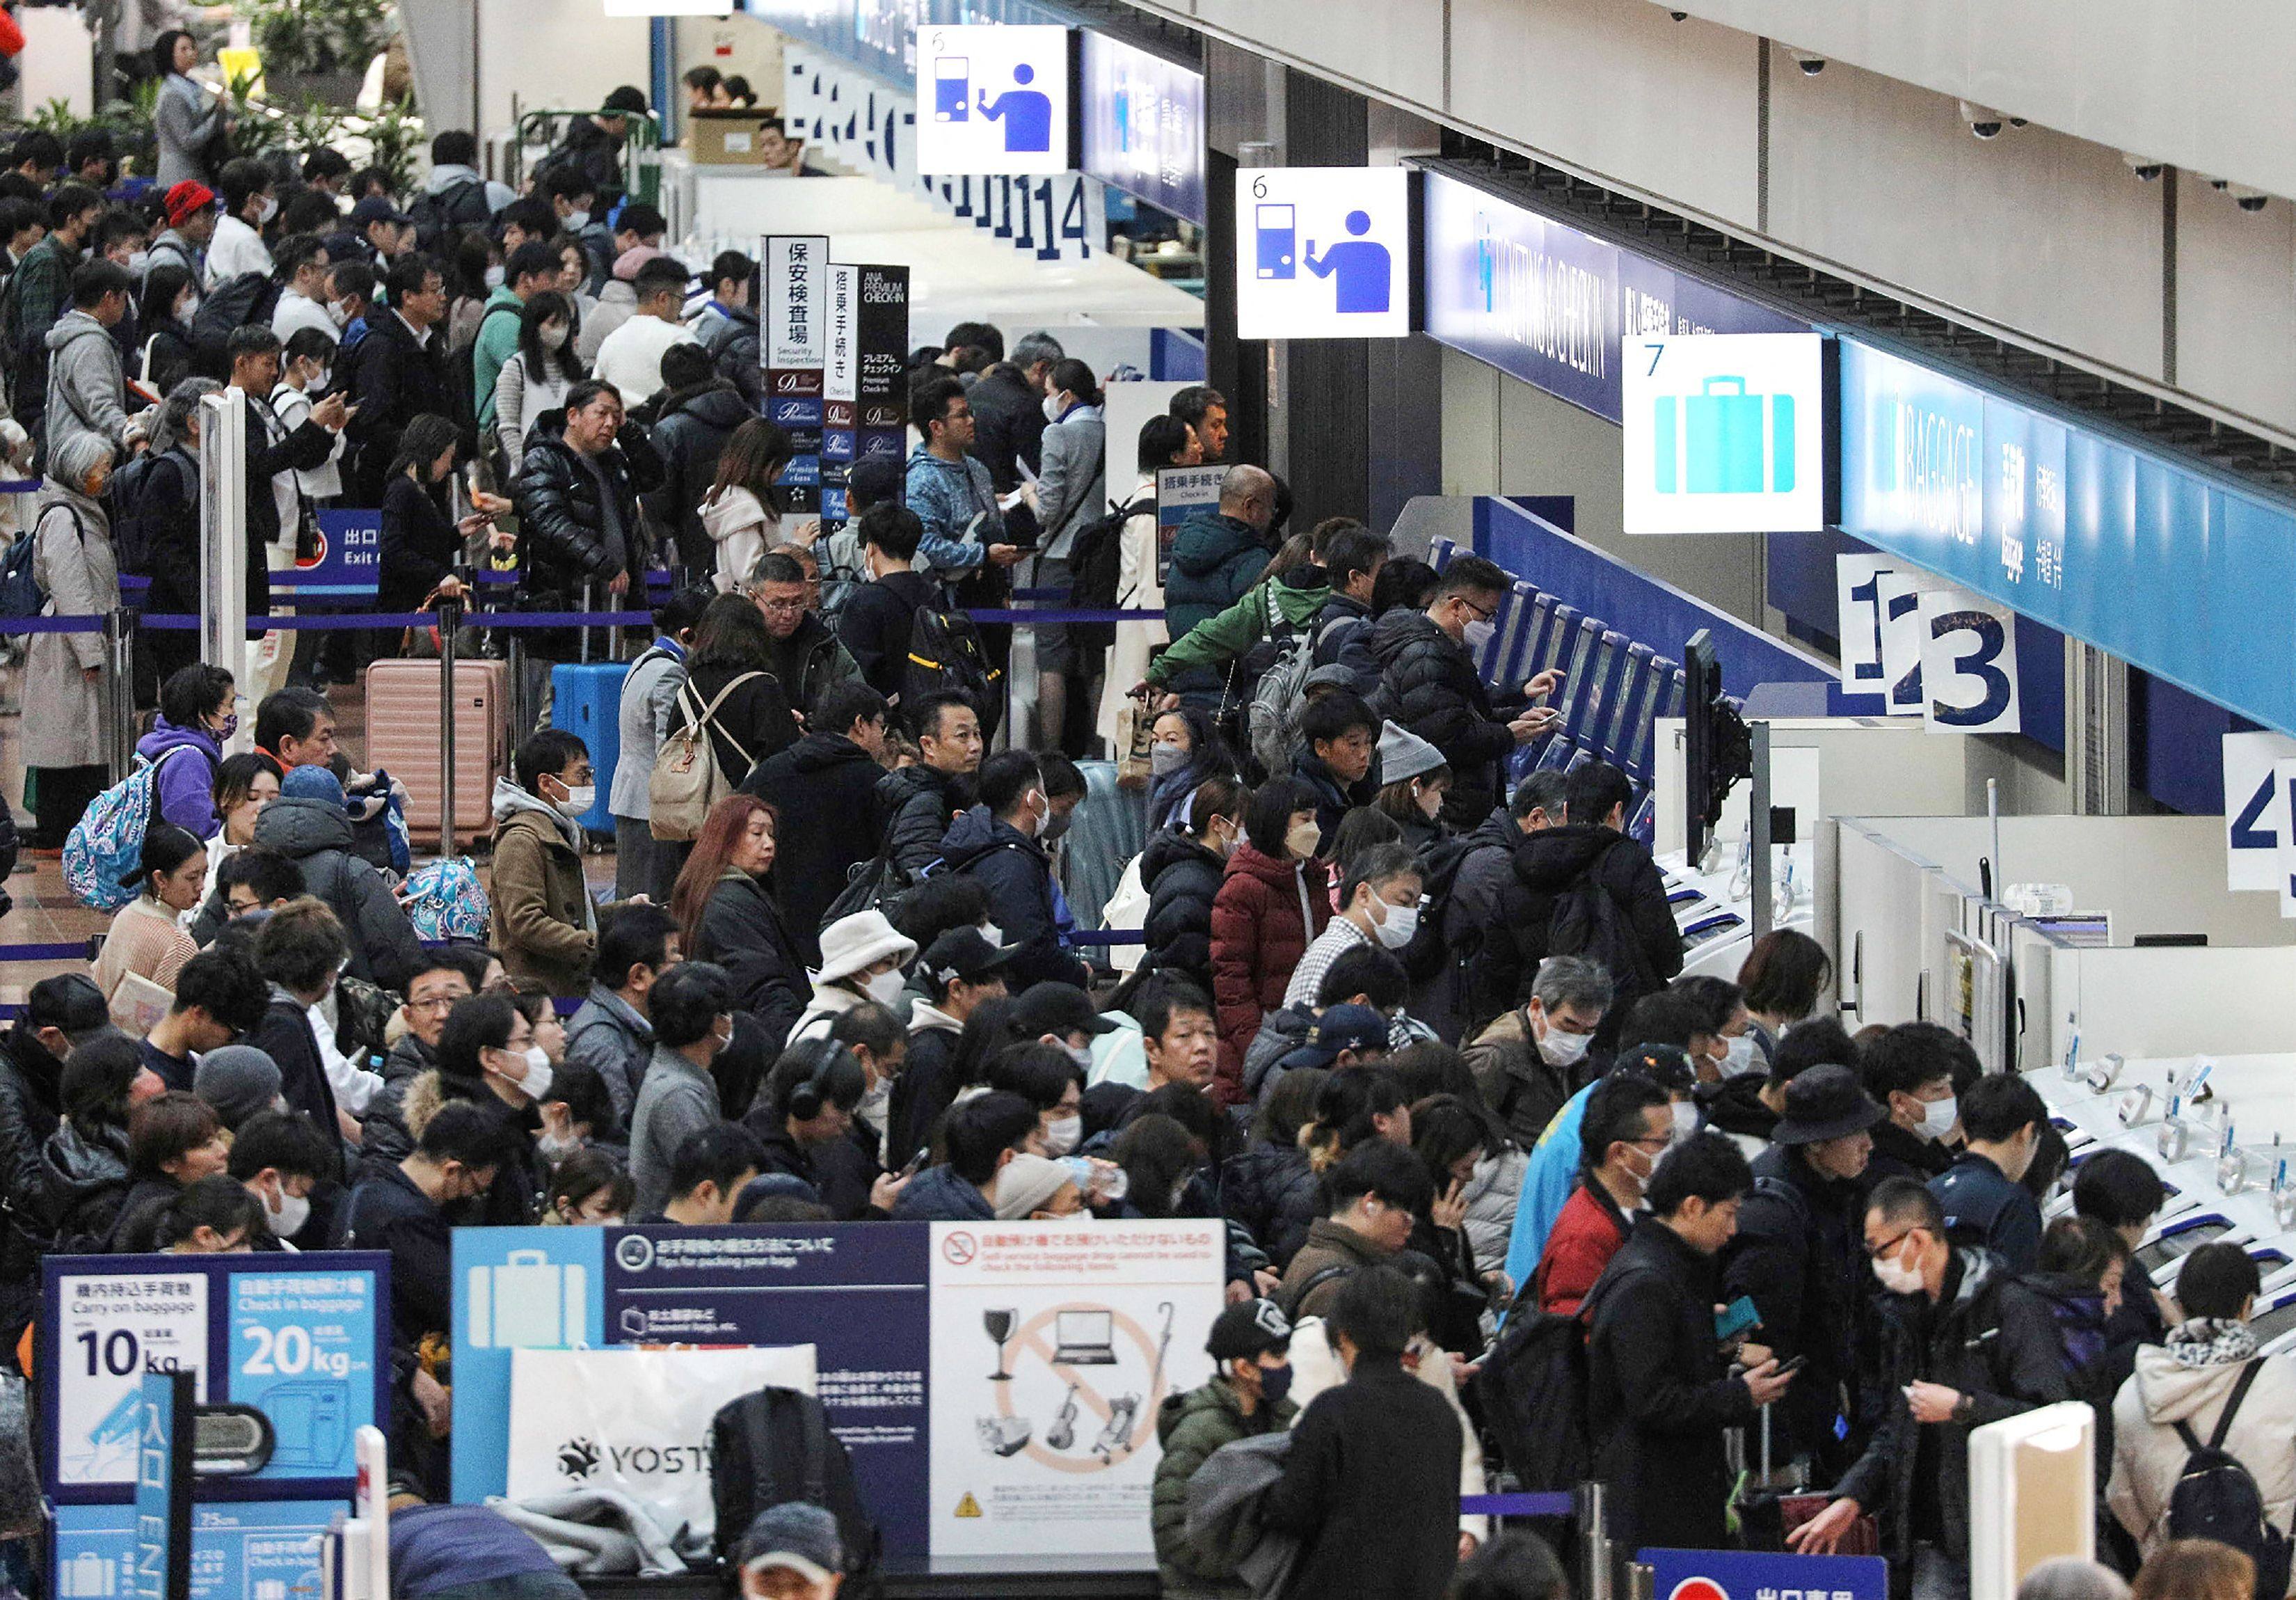 Japan’s aviation industry has seen a rise in customer harassment incidents. Photo: JIJI Press/AFP